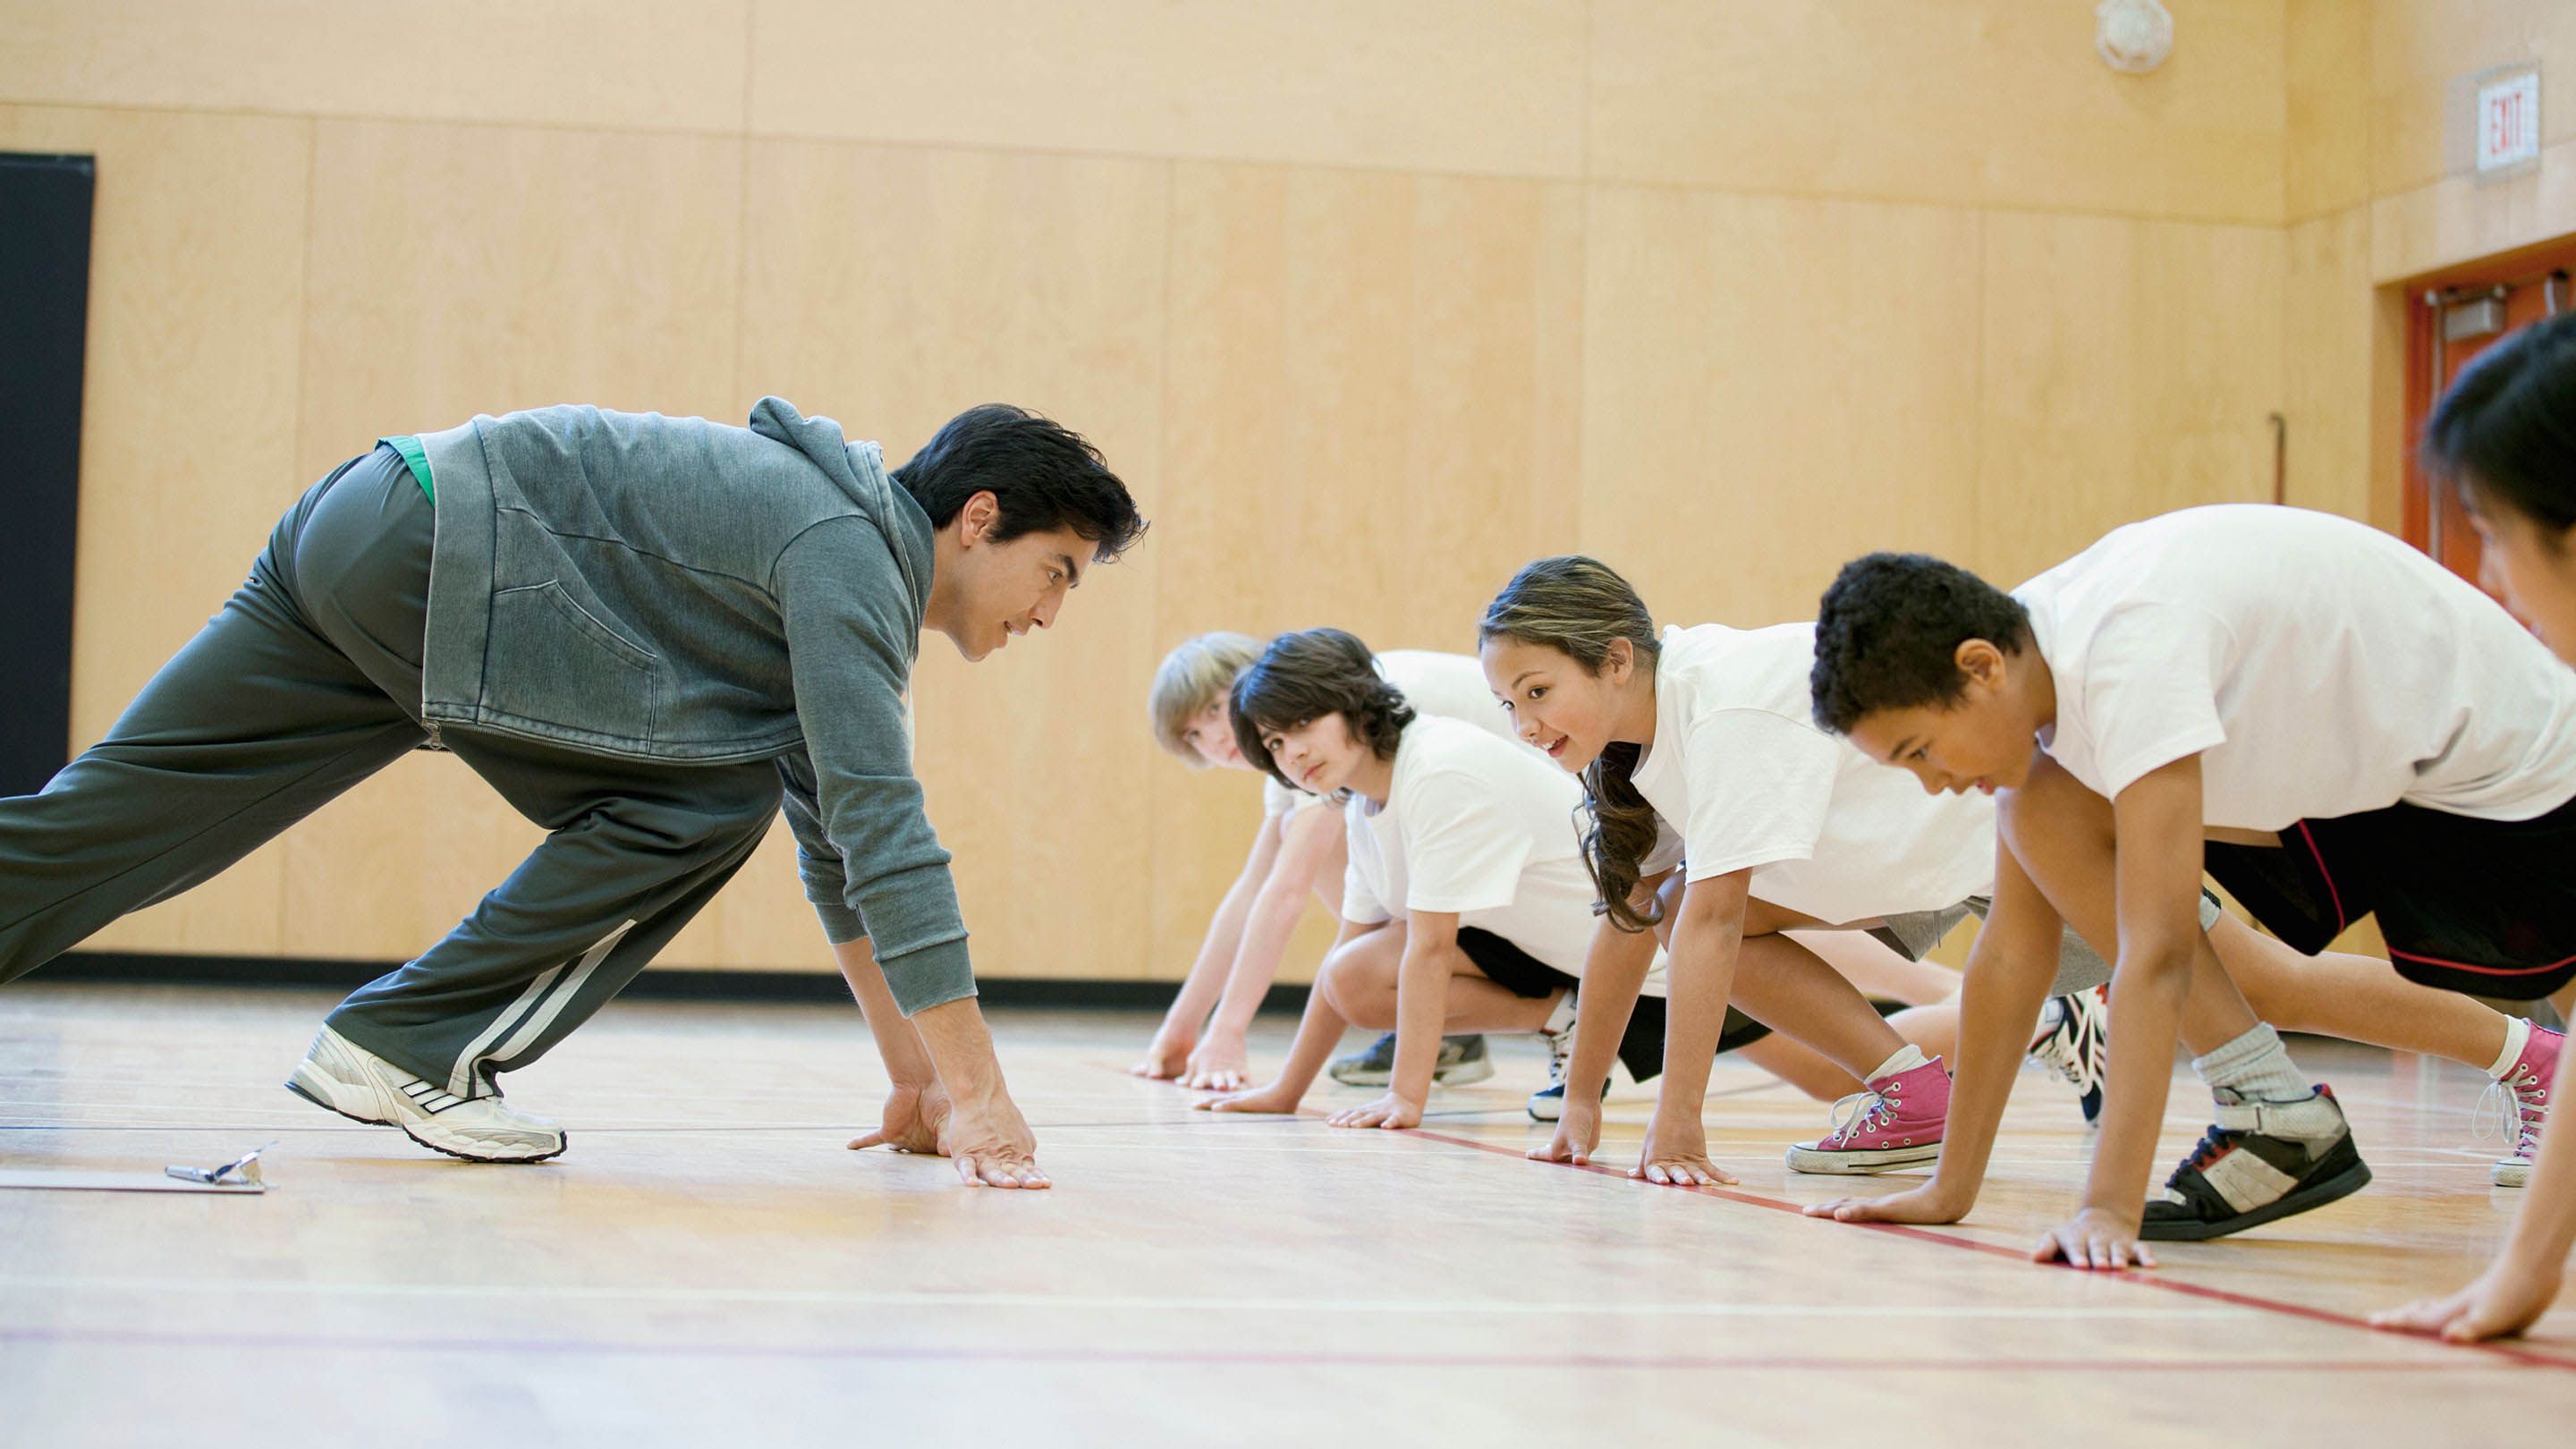 Fitness Games & Fun Exercise Activities for Kids | ACE Blog